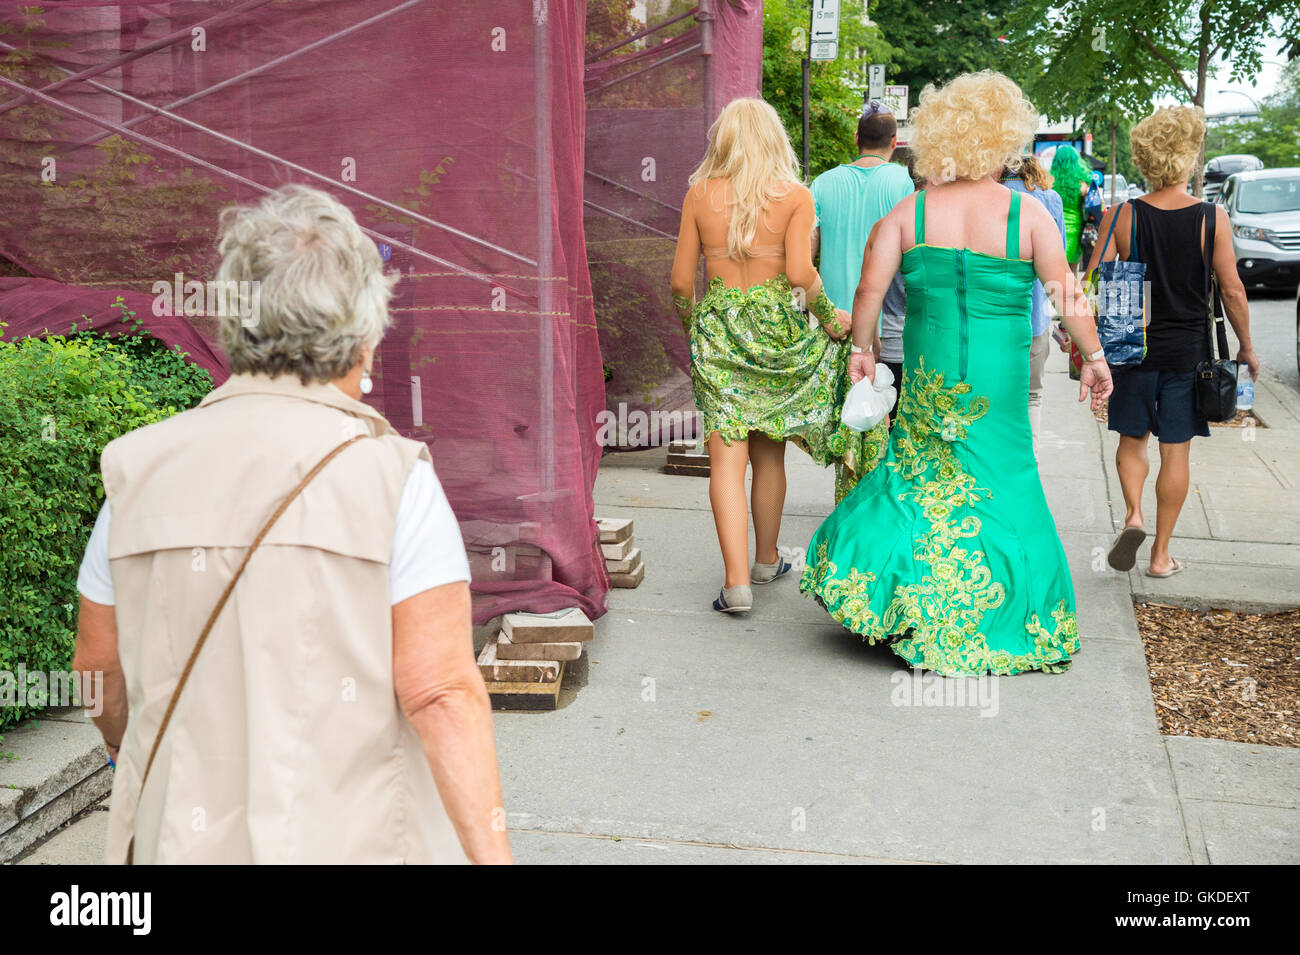 Montreal, CA - 14 August 2016: Drag-queens walking on the street in front of an old lady after Pride Parade. Stock Photo